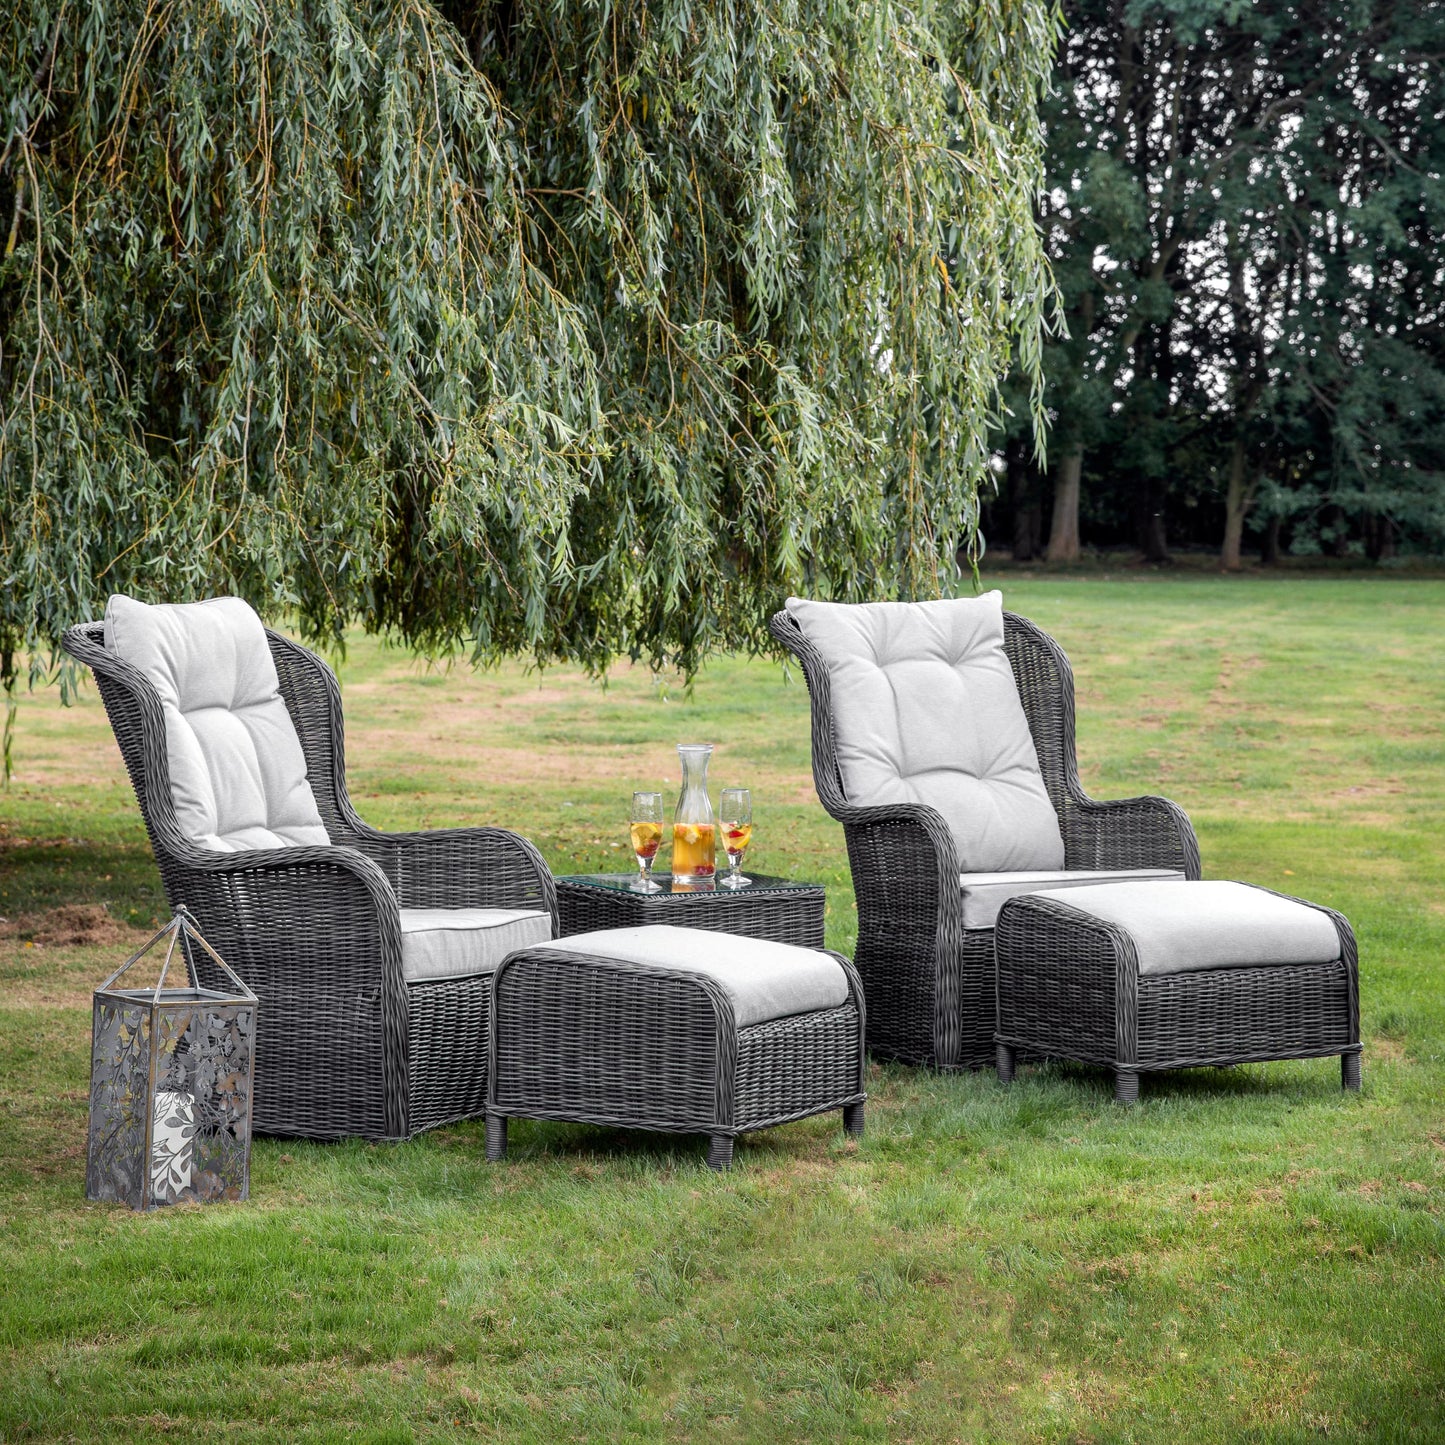 An interior decor item, the Otterton High Back Lounge Set Grey, is showcased in a grassy area on Kikiathome.co.uk.